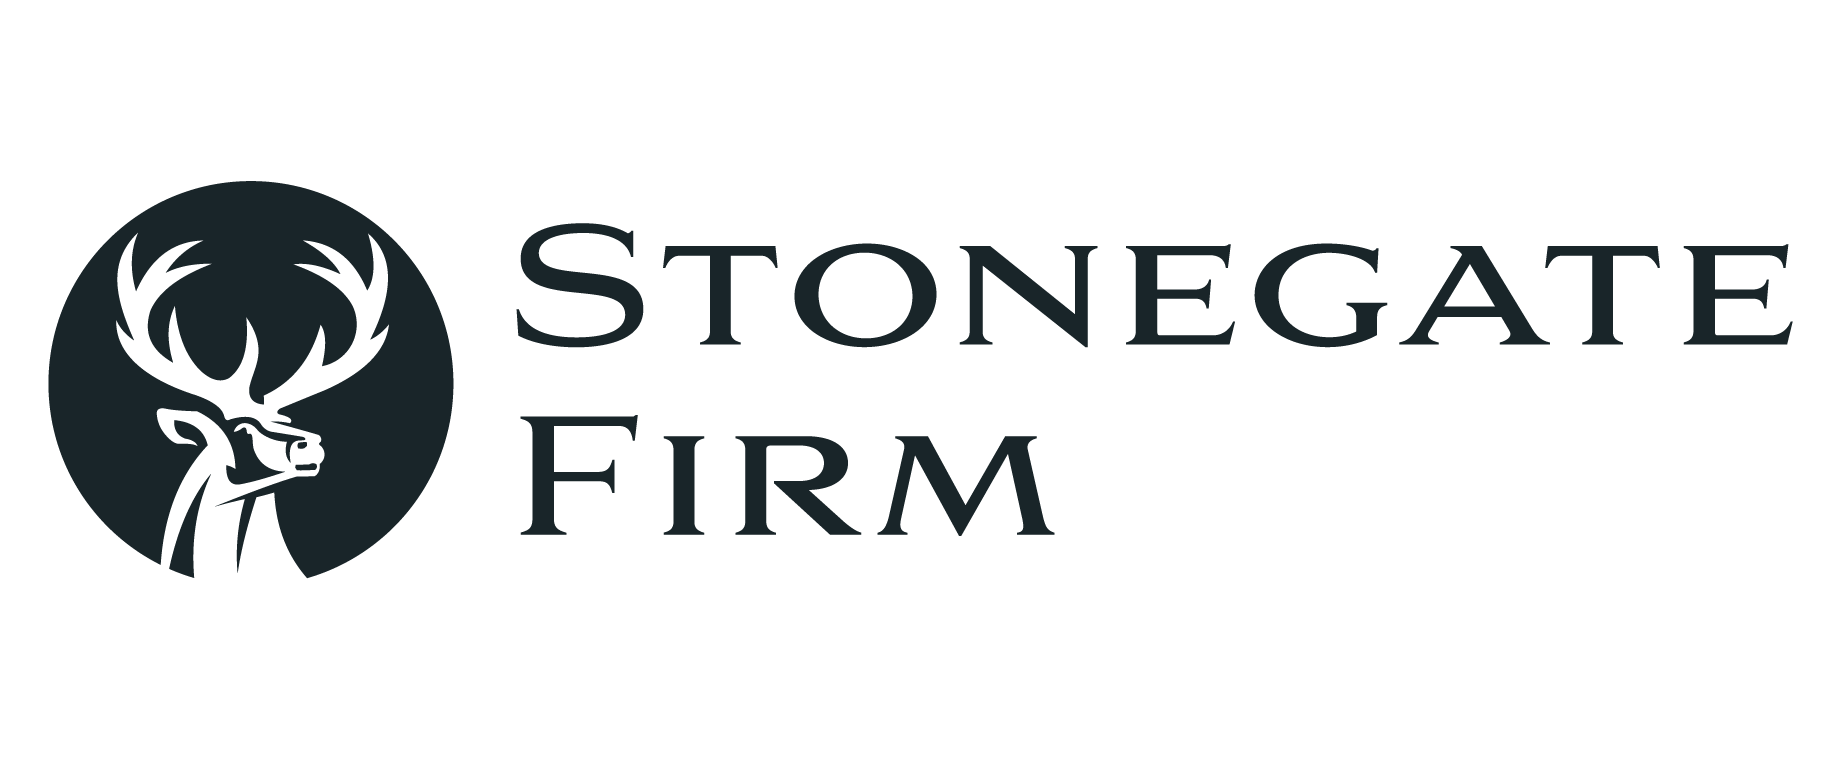 Stonegate Firm is a Leading Advocacy Firm for Consumers Who Want to Cancel their Timeshares